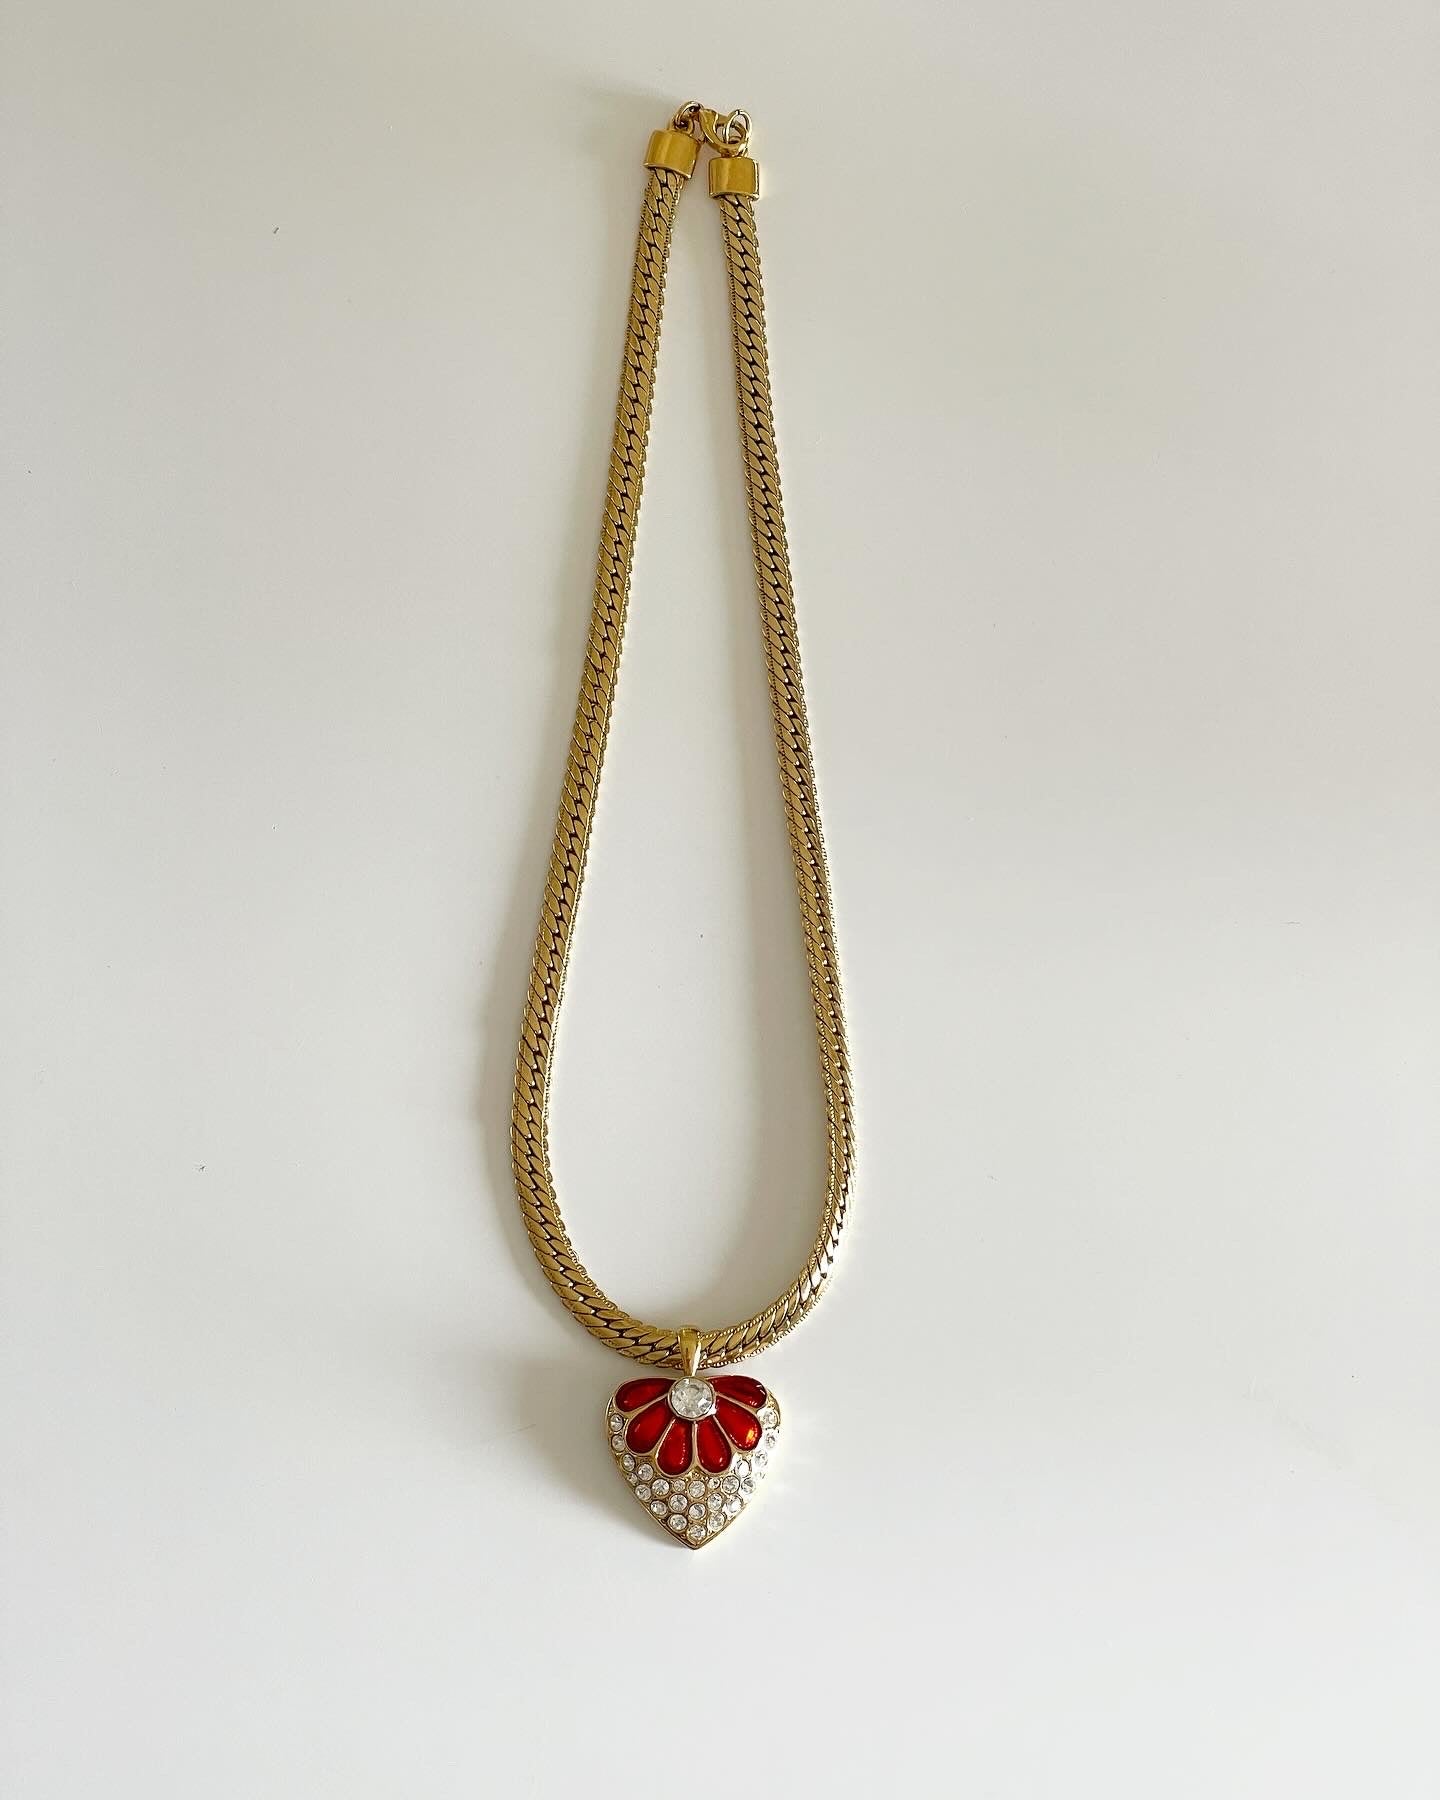 Gorgeous vintage necklace with strawberry-like design pendant